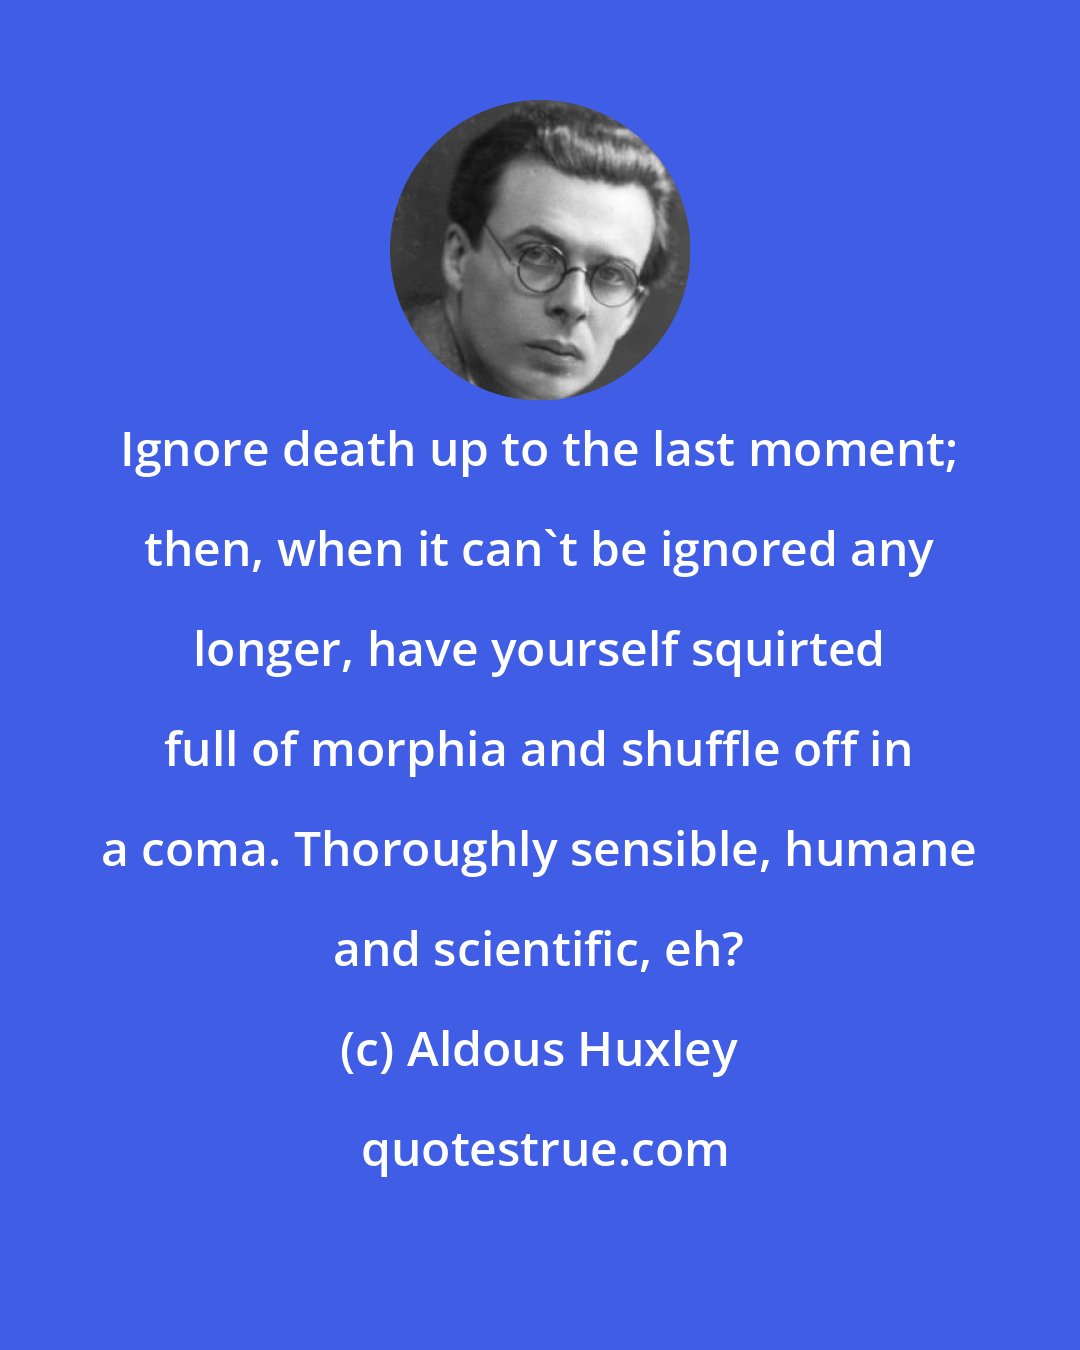 Aldous Huxley: Ignore death up to the last moment; then, when it can't be ignored any longer, have yourself squirted full of morphia and shuffle off in a coma. Thoroughly sensible, humane and scientific, eh?